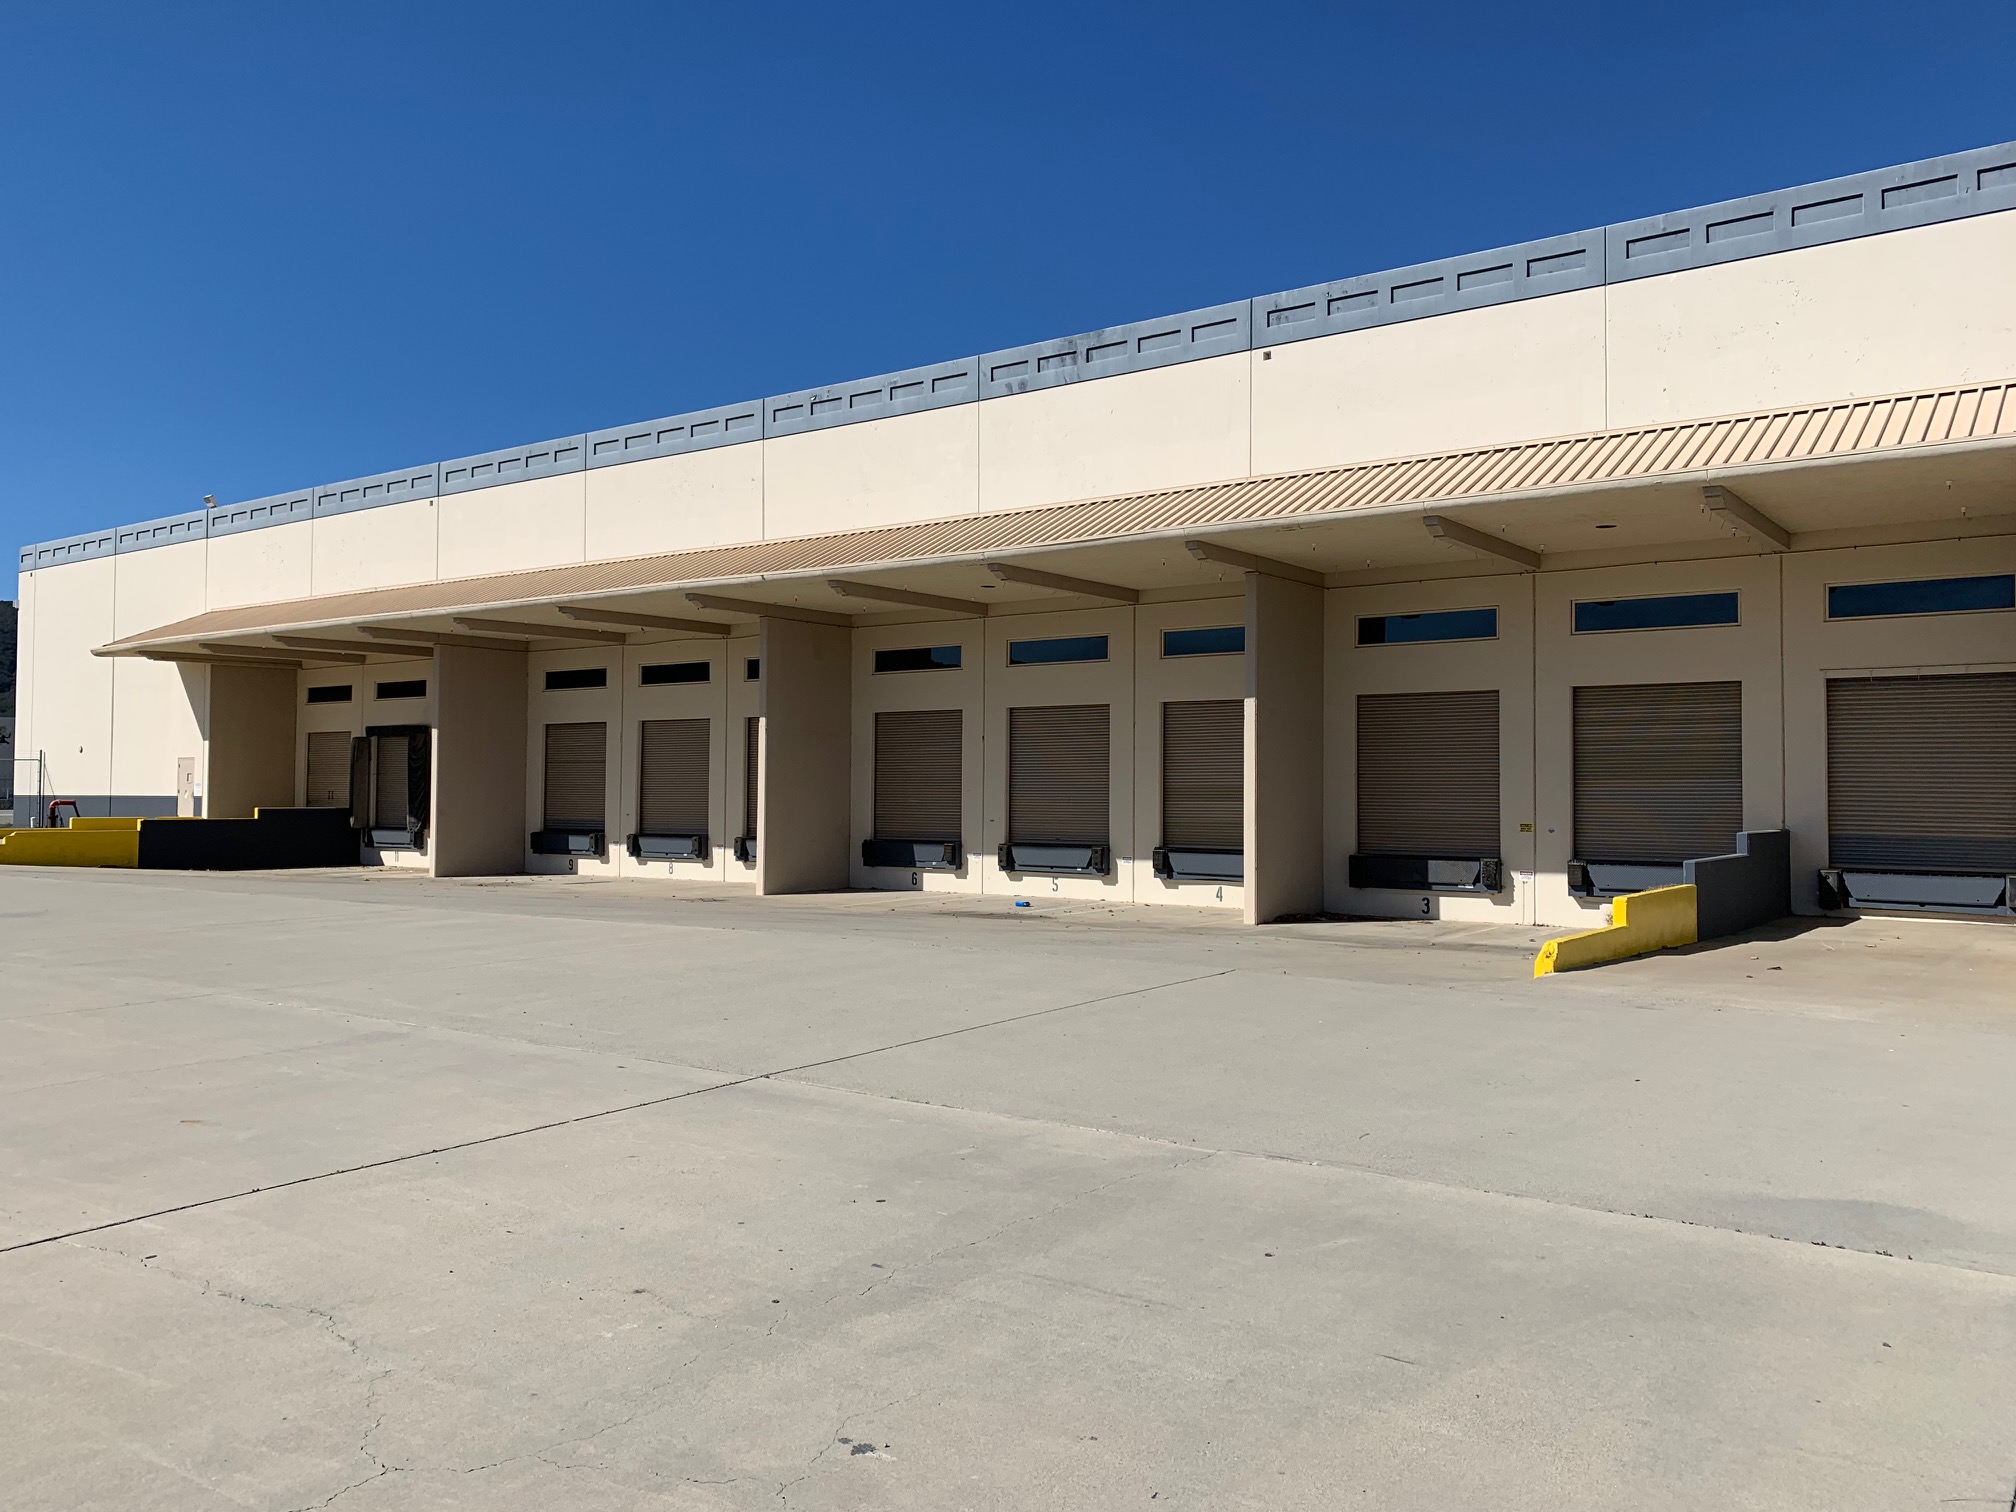 westcore-acquires-65625-sf-warehouse-on-10-64-acres-in-temecula